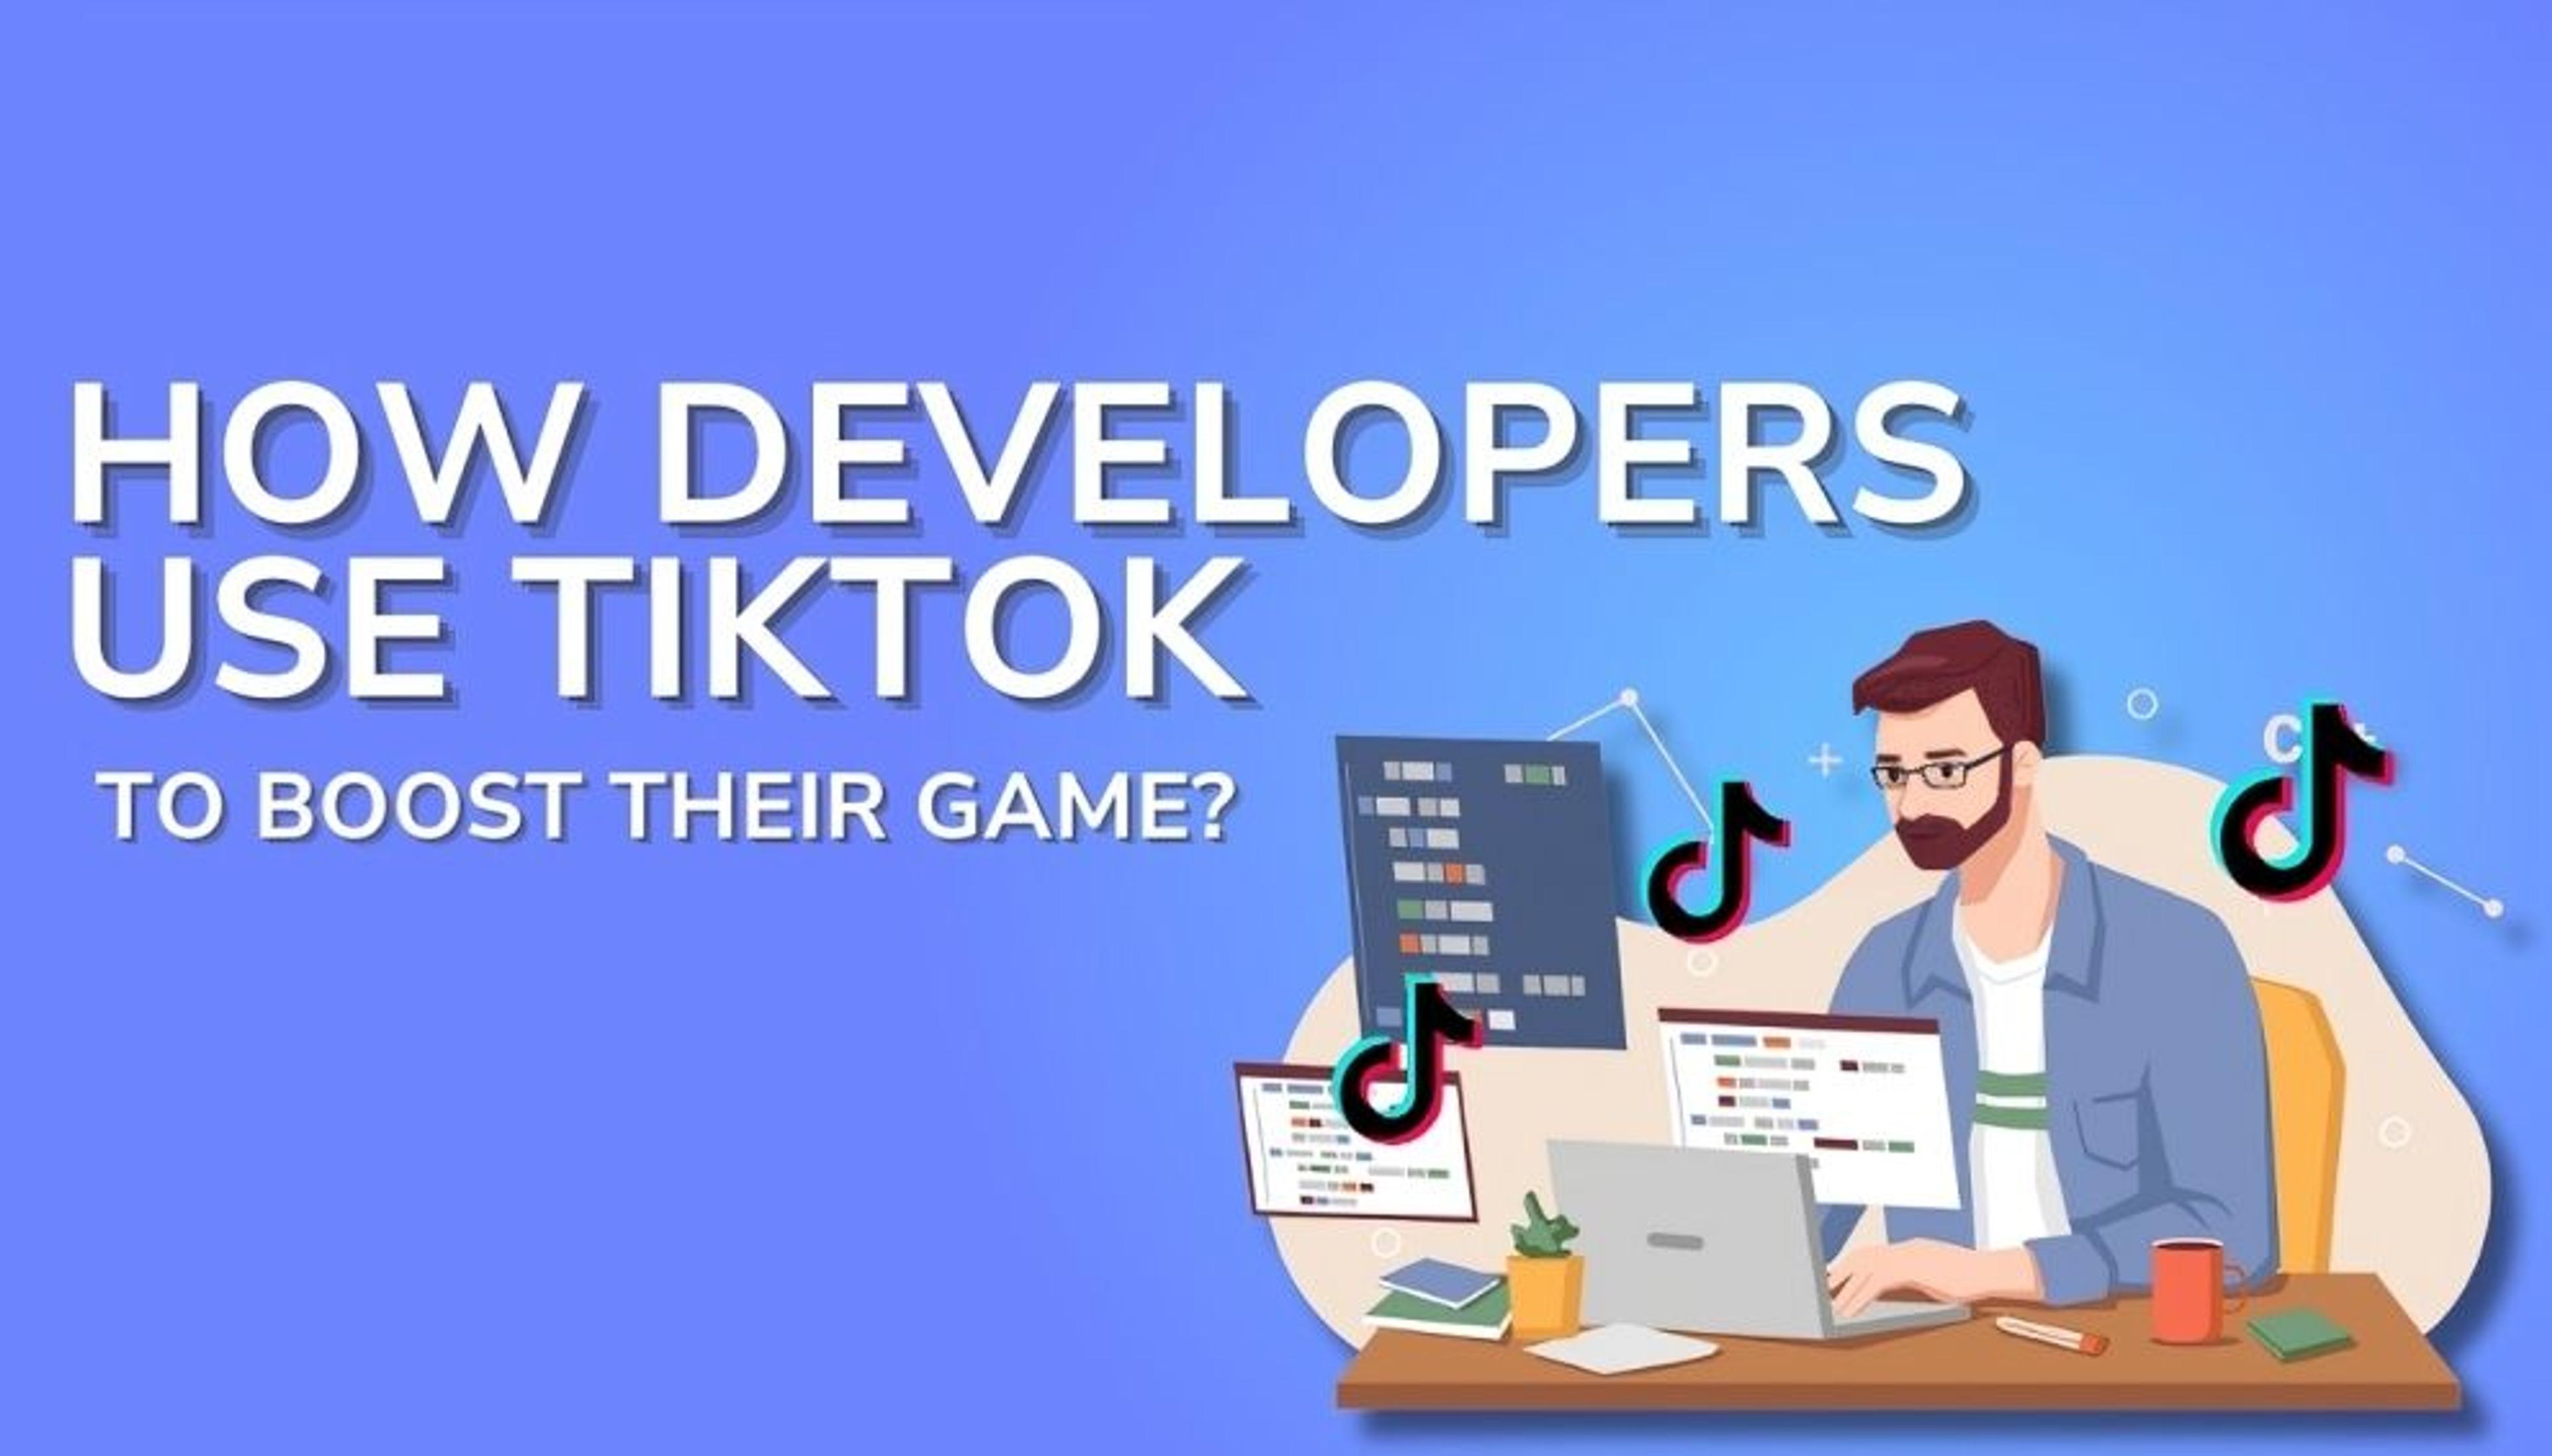 Game developers leveraging TikTok for enhanced visibility and promotion